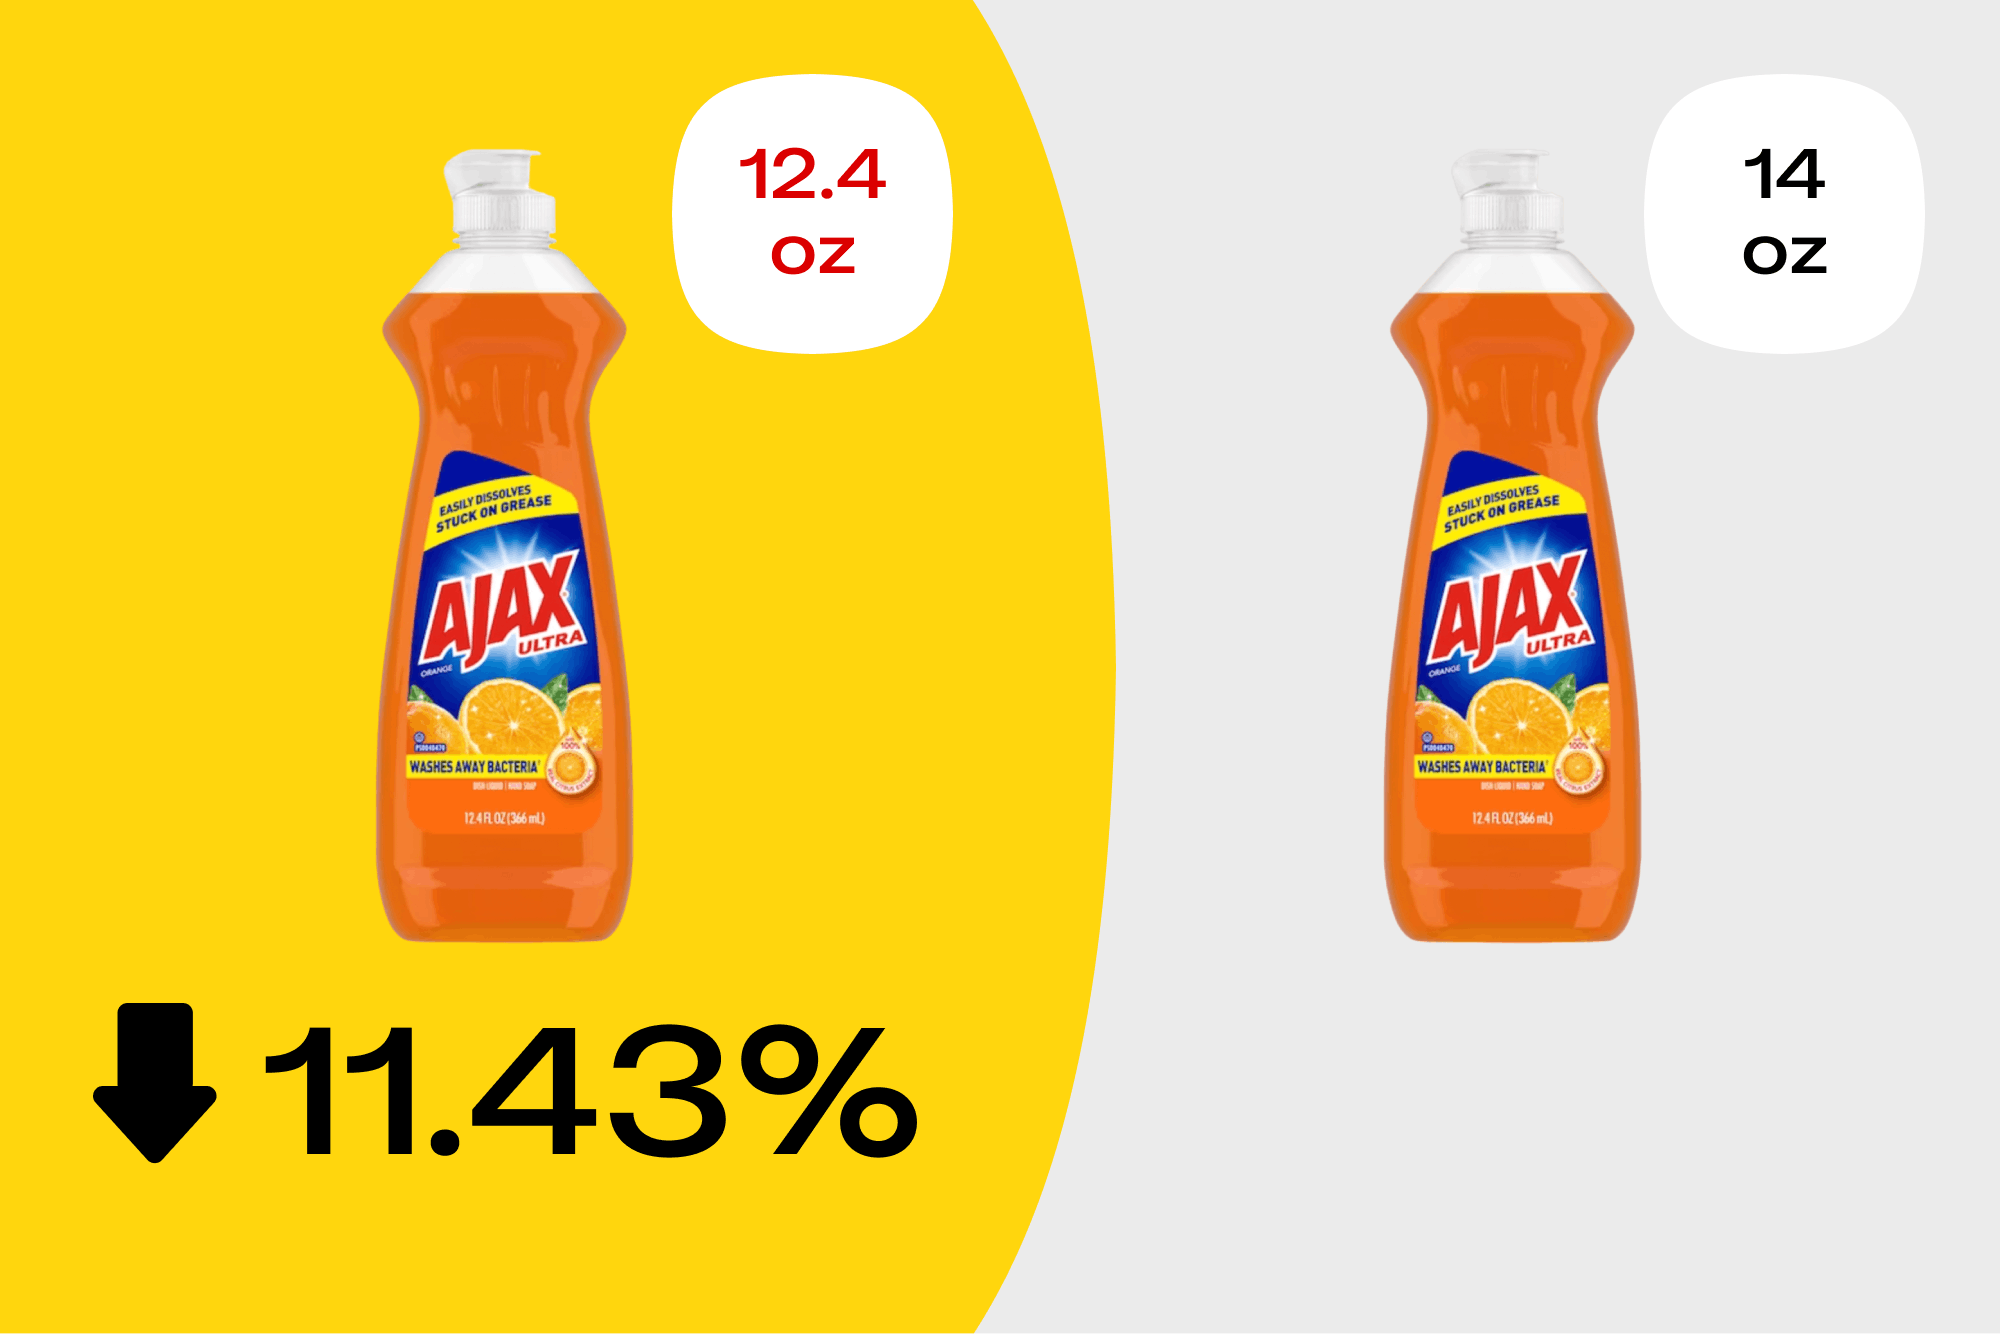 Graphic showing how AJAX soap is now 3.57% smaller thanks to shrinkflation